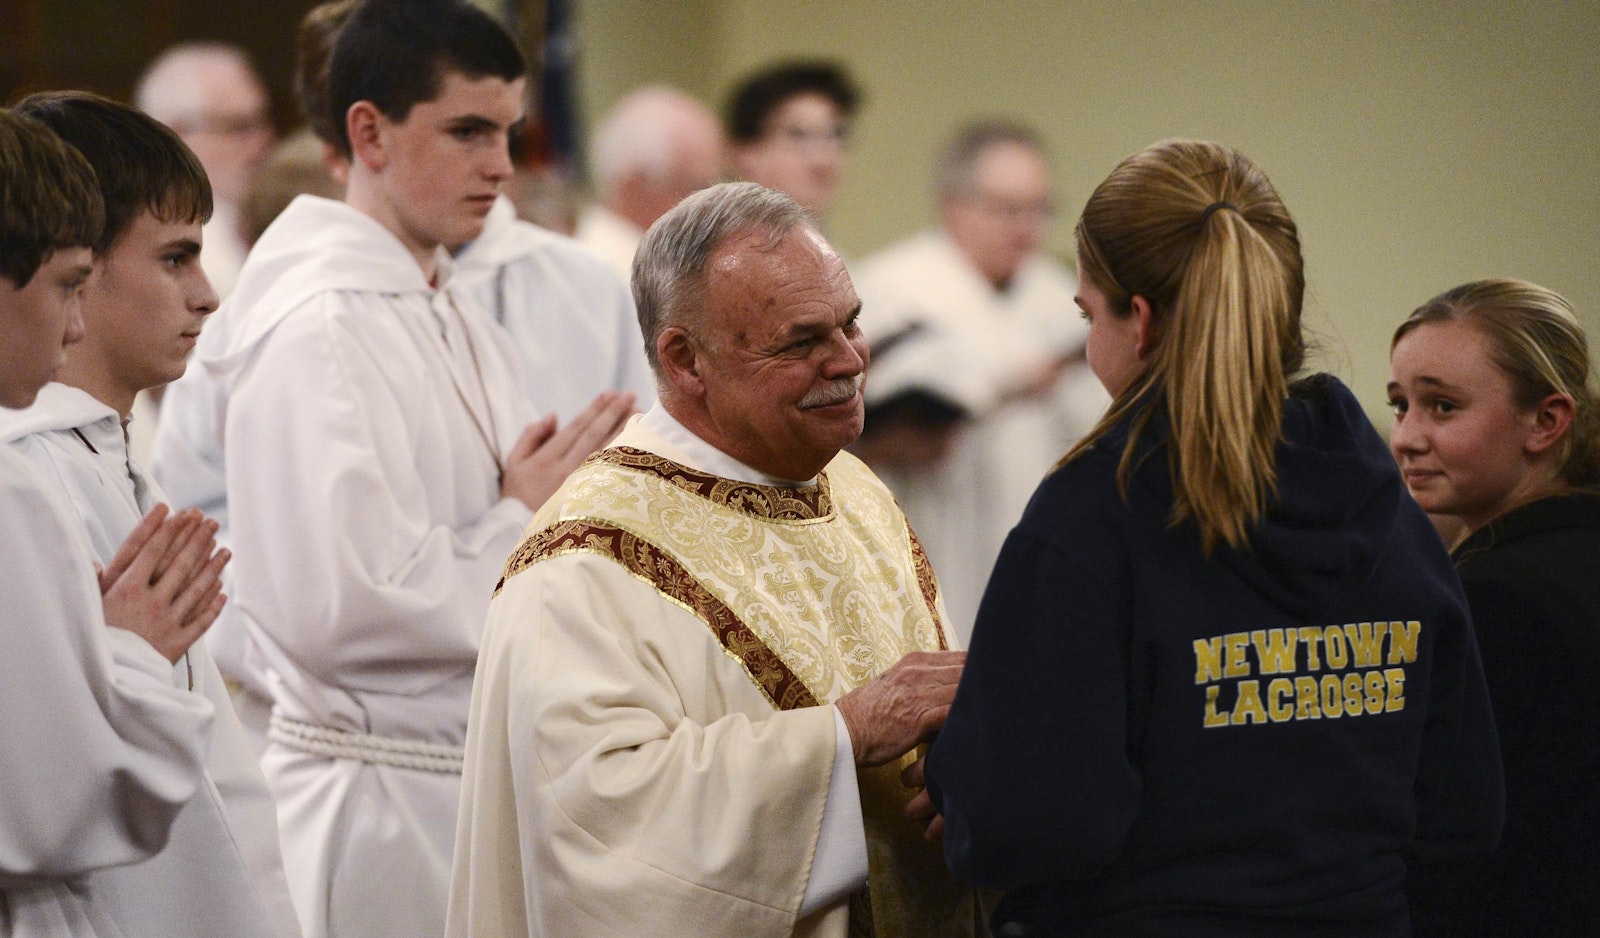 Msgr. Robert Weiss speaks to young women inside St. Rose of Lima Church during a vigil service Dec. 14, 2012, in Newtown, Conn. At least eight of the 20 children killed in the shooting rampage at nearby Sandy Hook Elementary were from St. Rose, a parish of 3,200 families and the only Catholic church in Newtown. (CNS photo/Andrew Gombert, pool via Reuters)